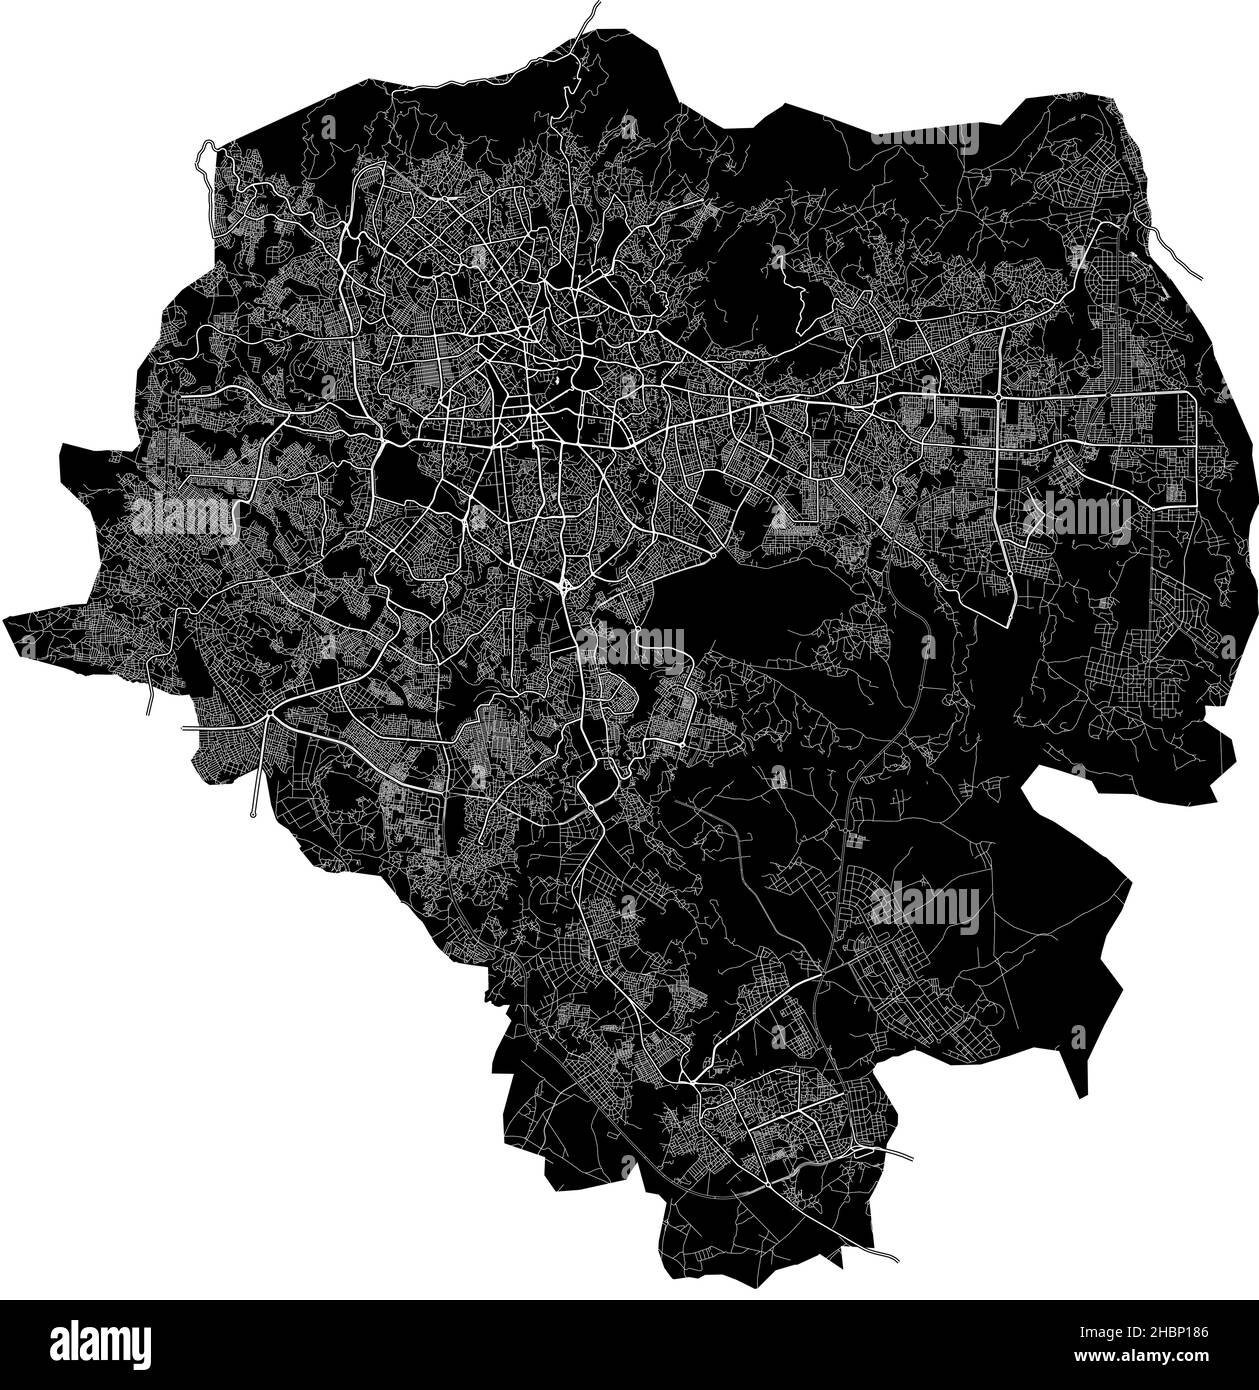 Addis Ababa, Ethiopia, high resolution vector map with city boundaries, and editable paths. The city map was drawn with white areas and lines for main Stock Vector